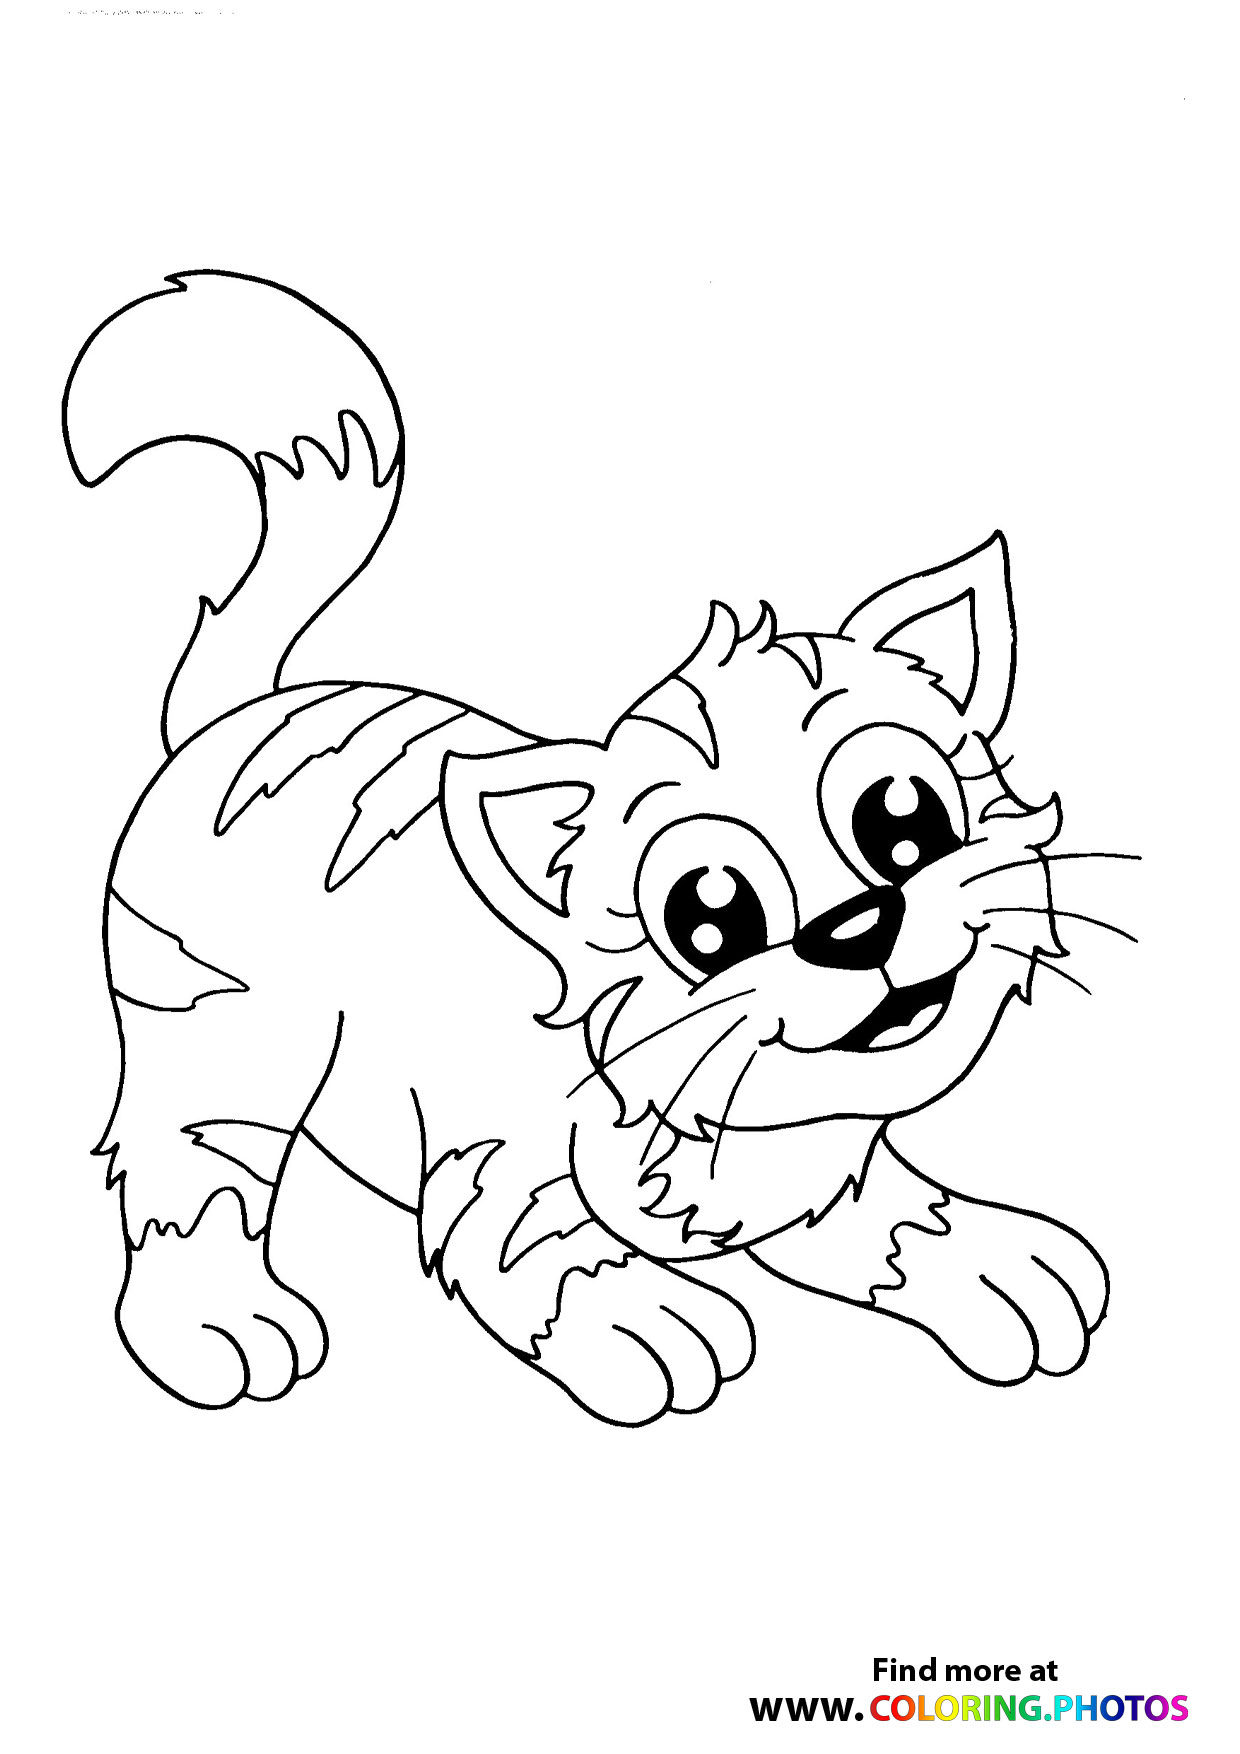 Cakey Cat - Gaby's Dollhouse - Coloring Pages for kids